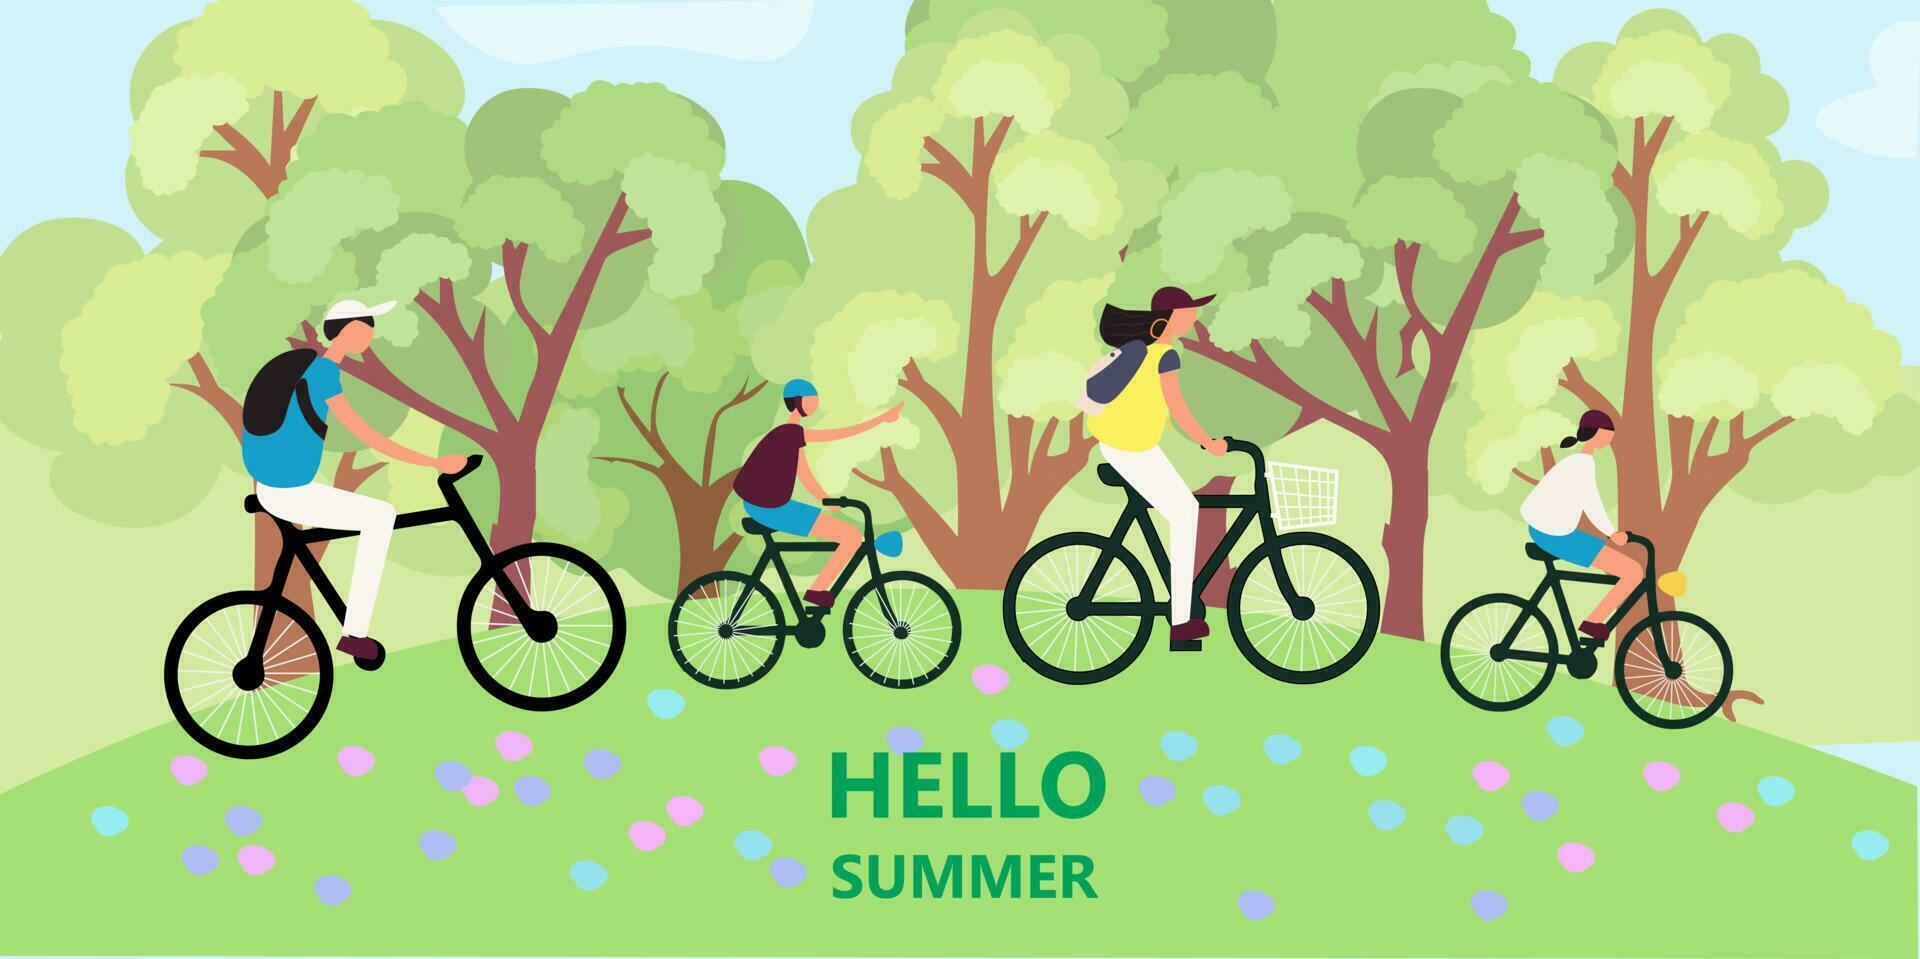 Active family riding on bike at forest park vector flat illustration. Mother, father, daughter and son cycling together. Parents and kids enjoying recreation lifestyle, outdoor activity. Hello summer